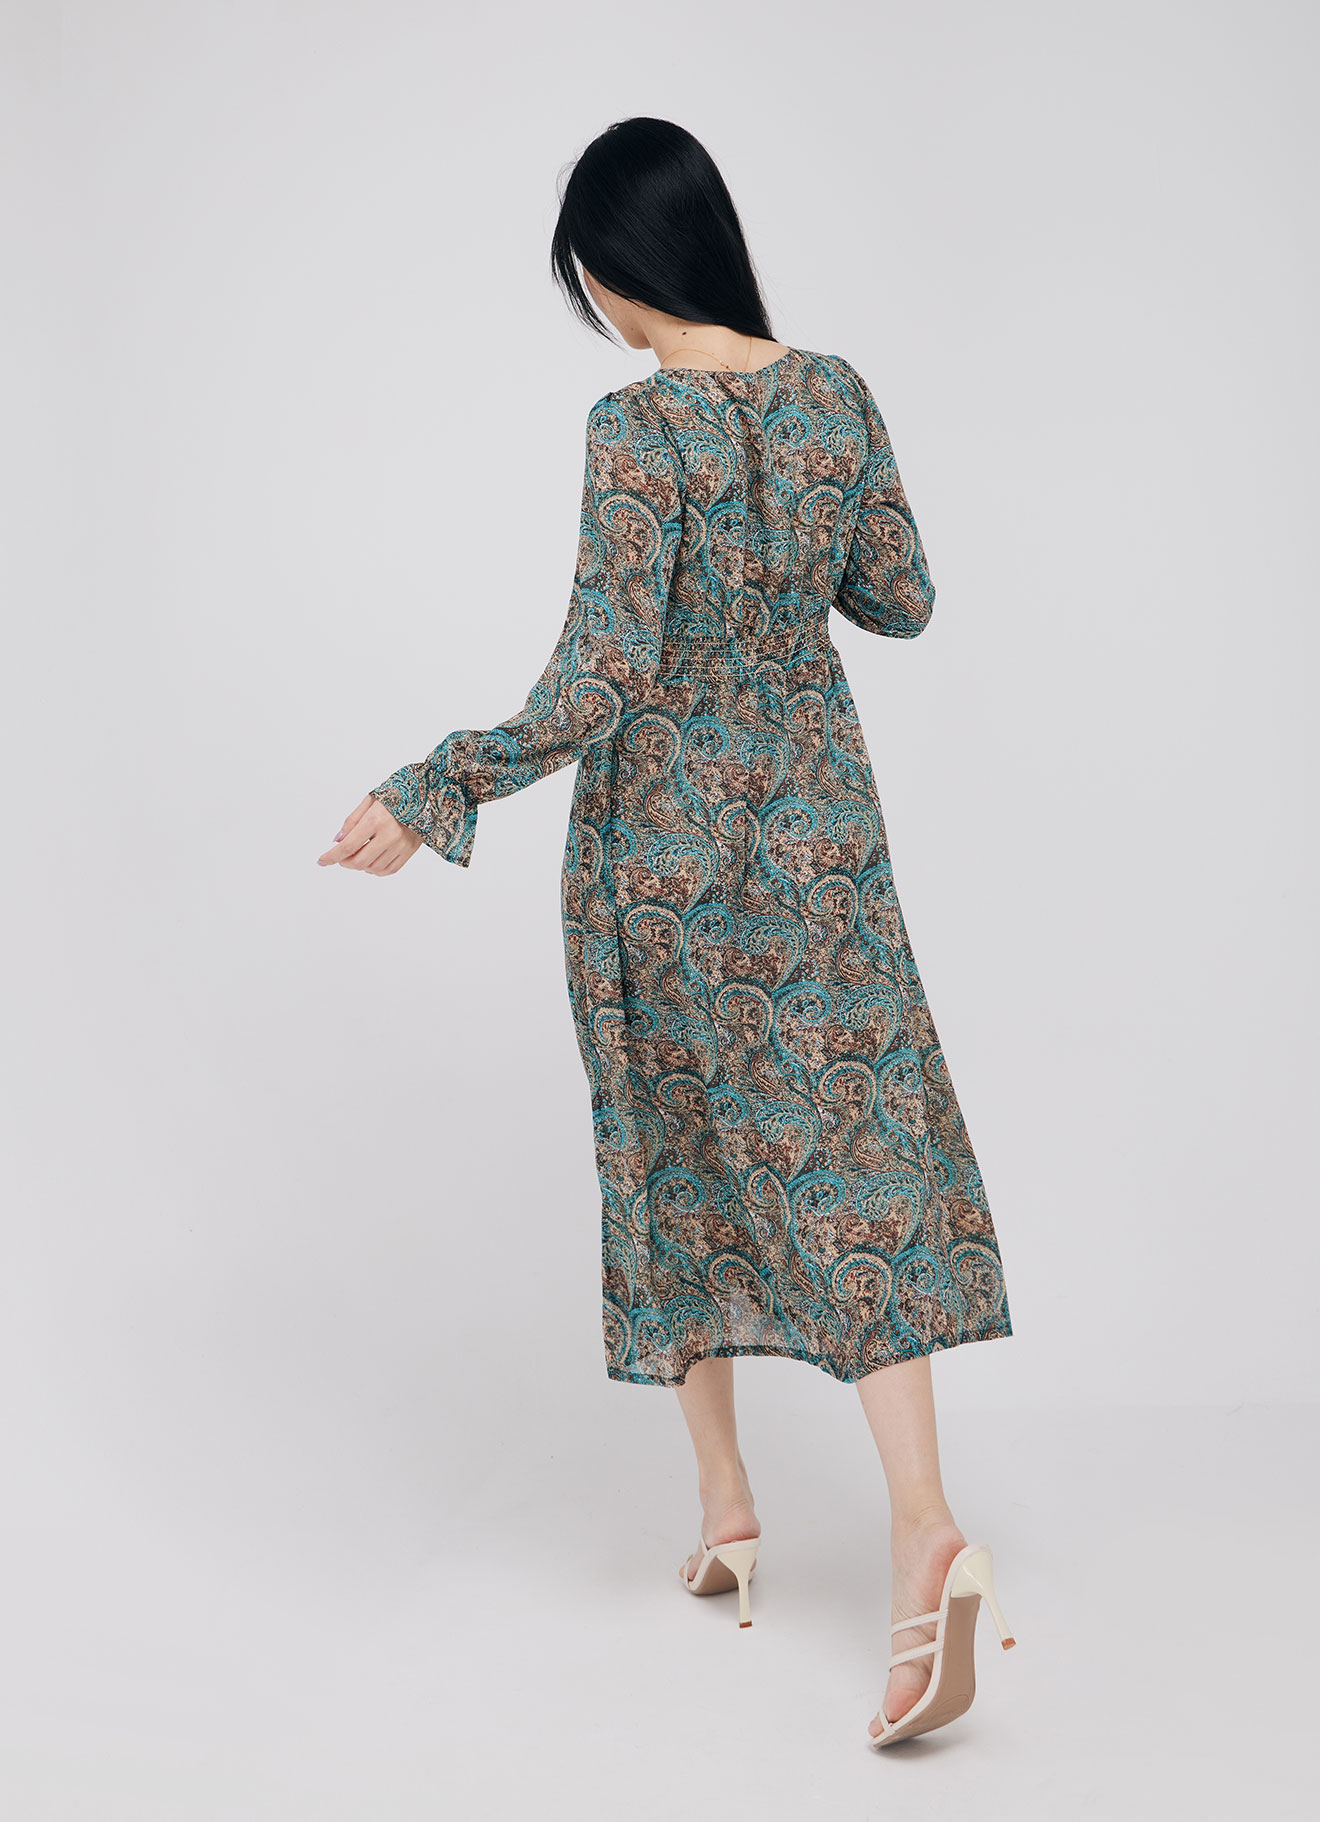 Blue-Radiance by Long Sleeve Dress